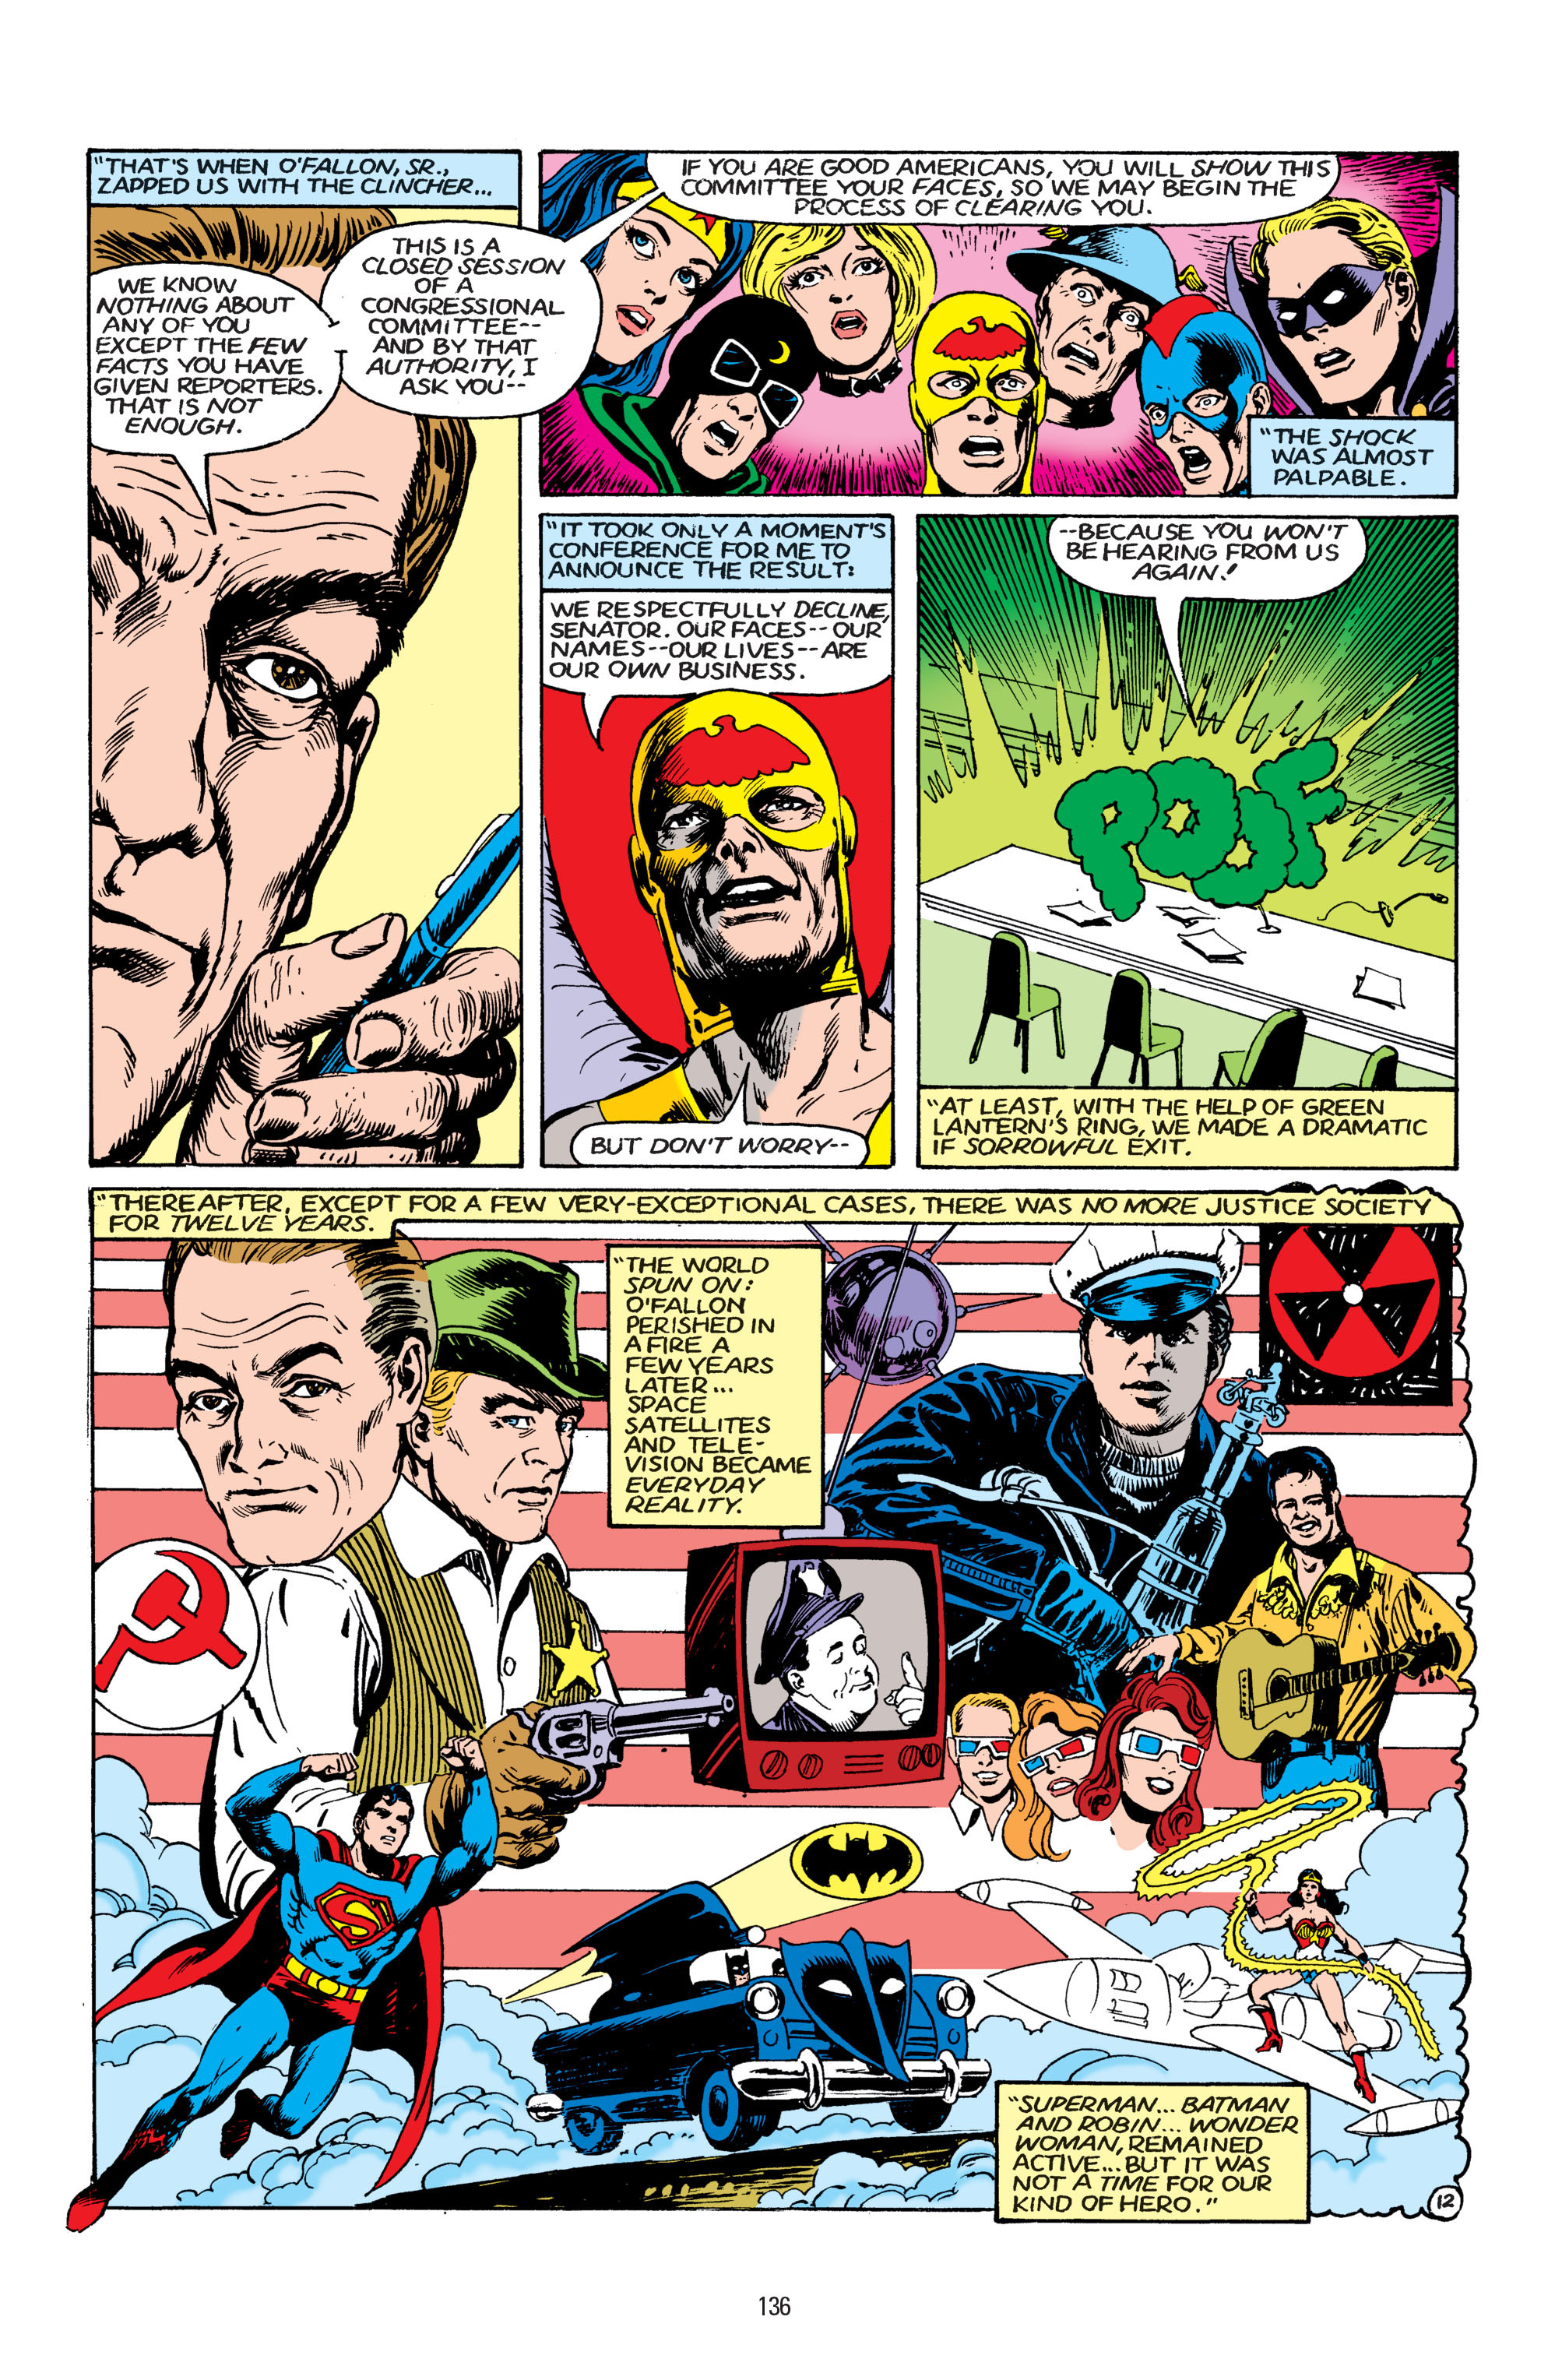 Read online America vs. the Justice Society comic -  Issue # TPB - 130